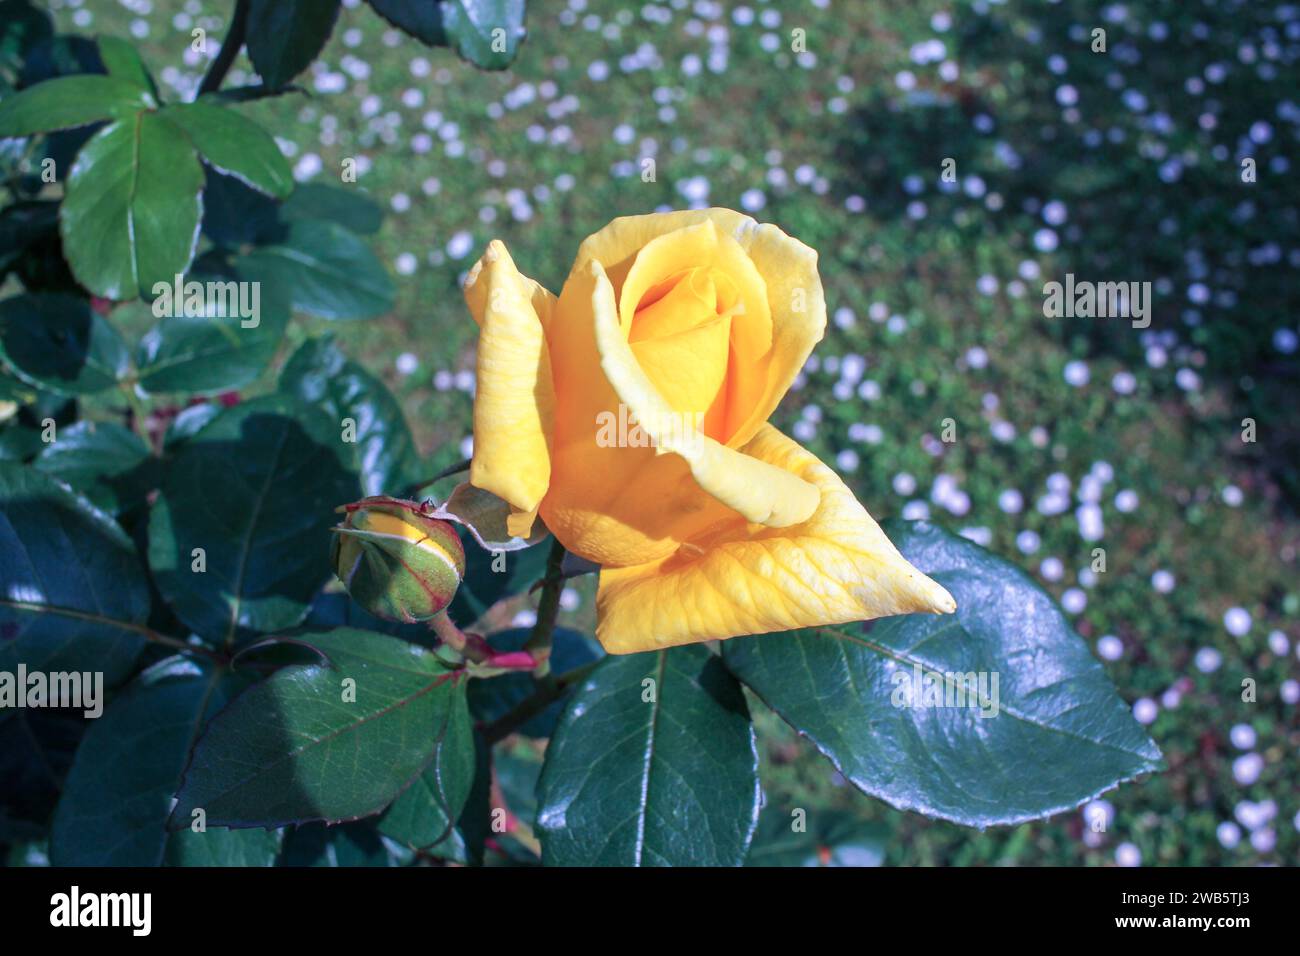 A vibrant yellow rose, bathed in sunlight, unfurls its petals, a radiant emblem of nature's rebirth and the splendor of spring Stock Photo